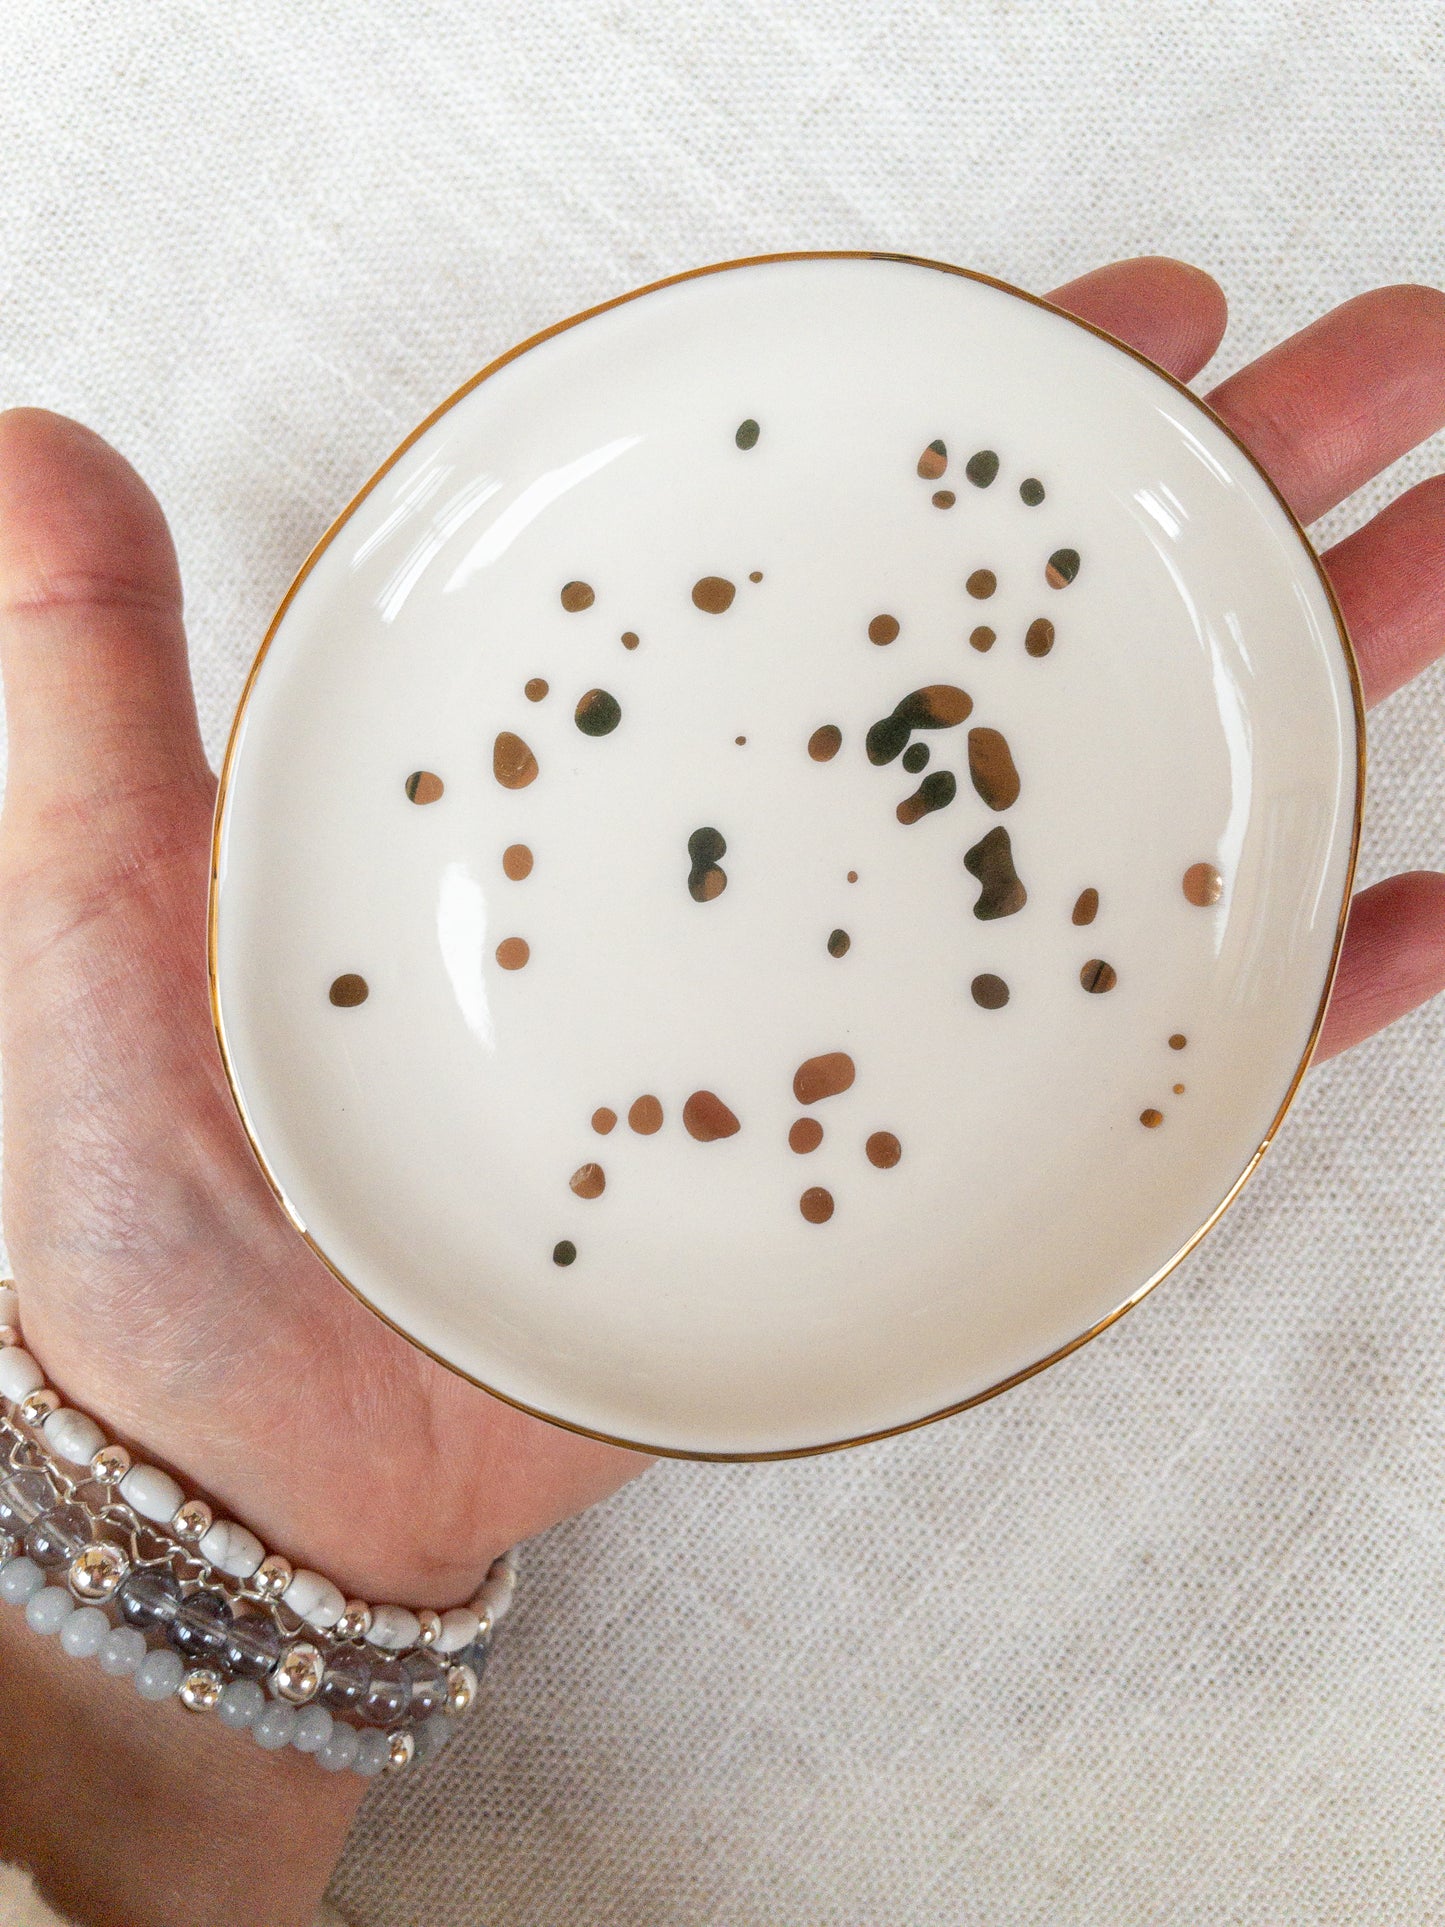 gold speckled jewelry dish | ceramic *limited quantities*